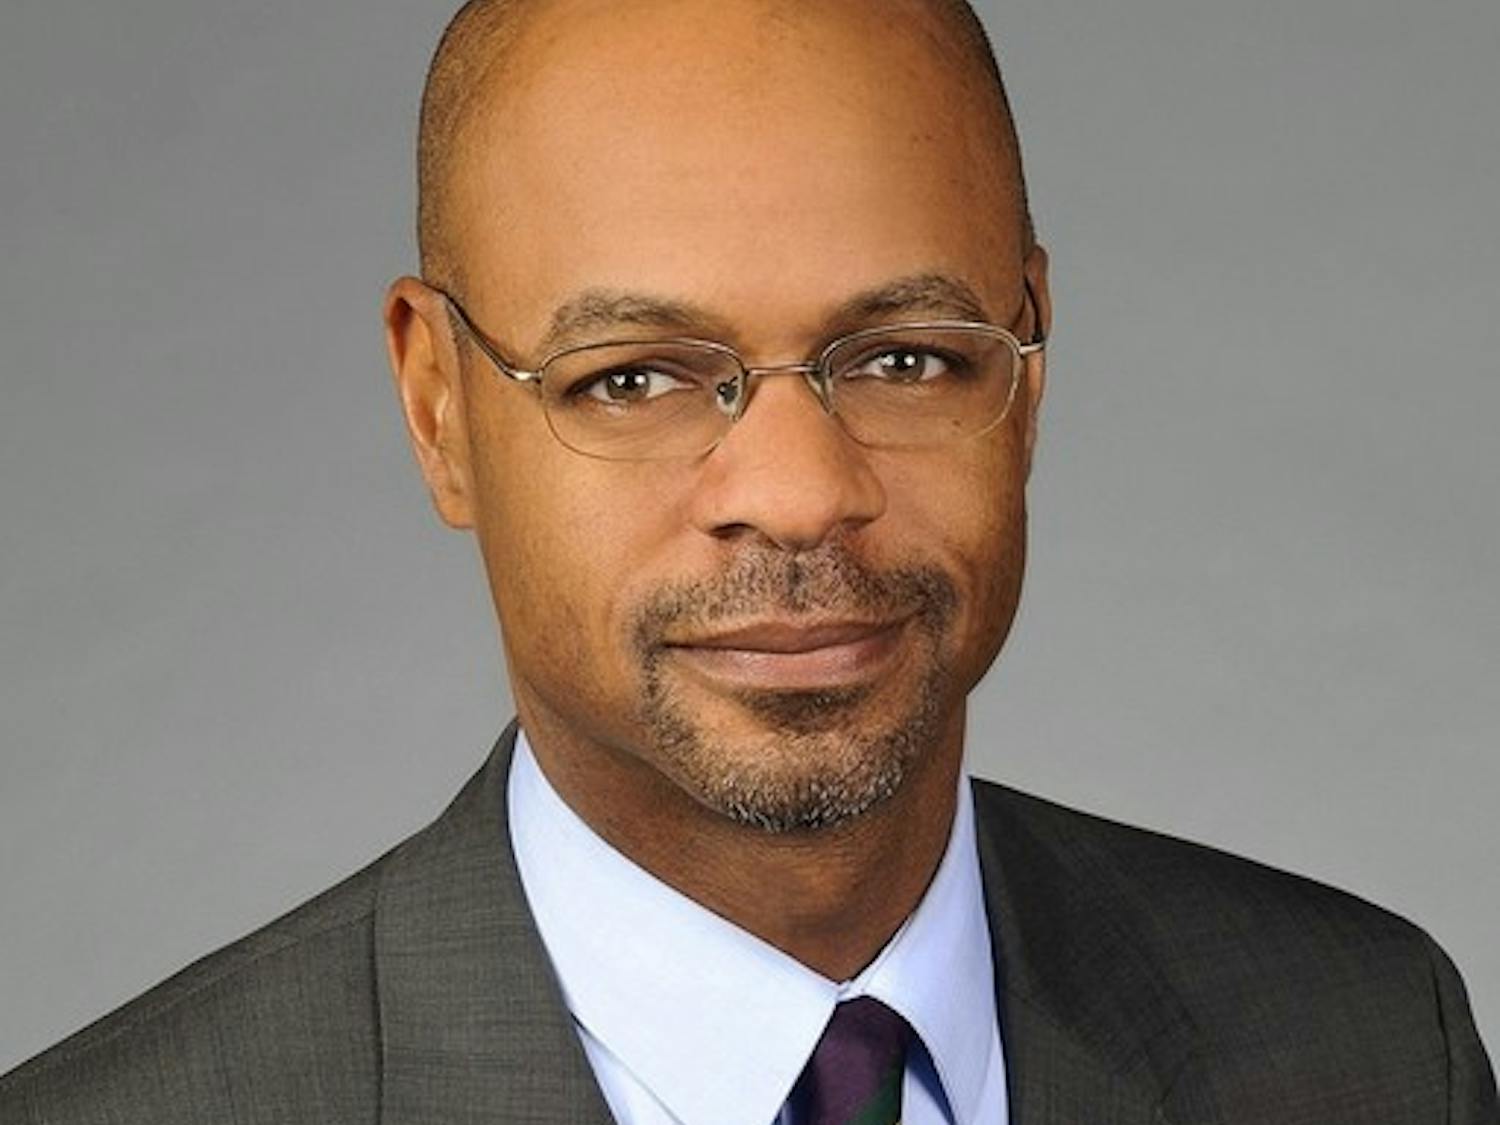 Georgia Supreme Court Justice Harold Melton was elected as chief justice by his colleagues.&nbsp;